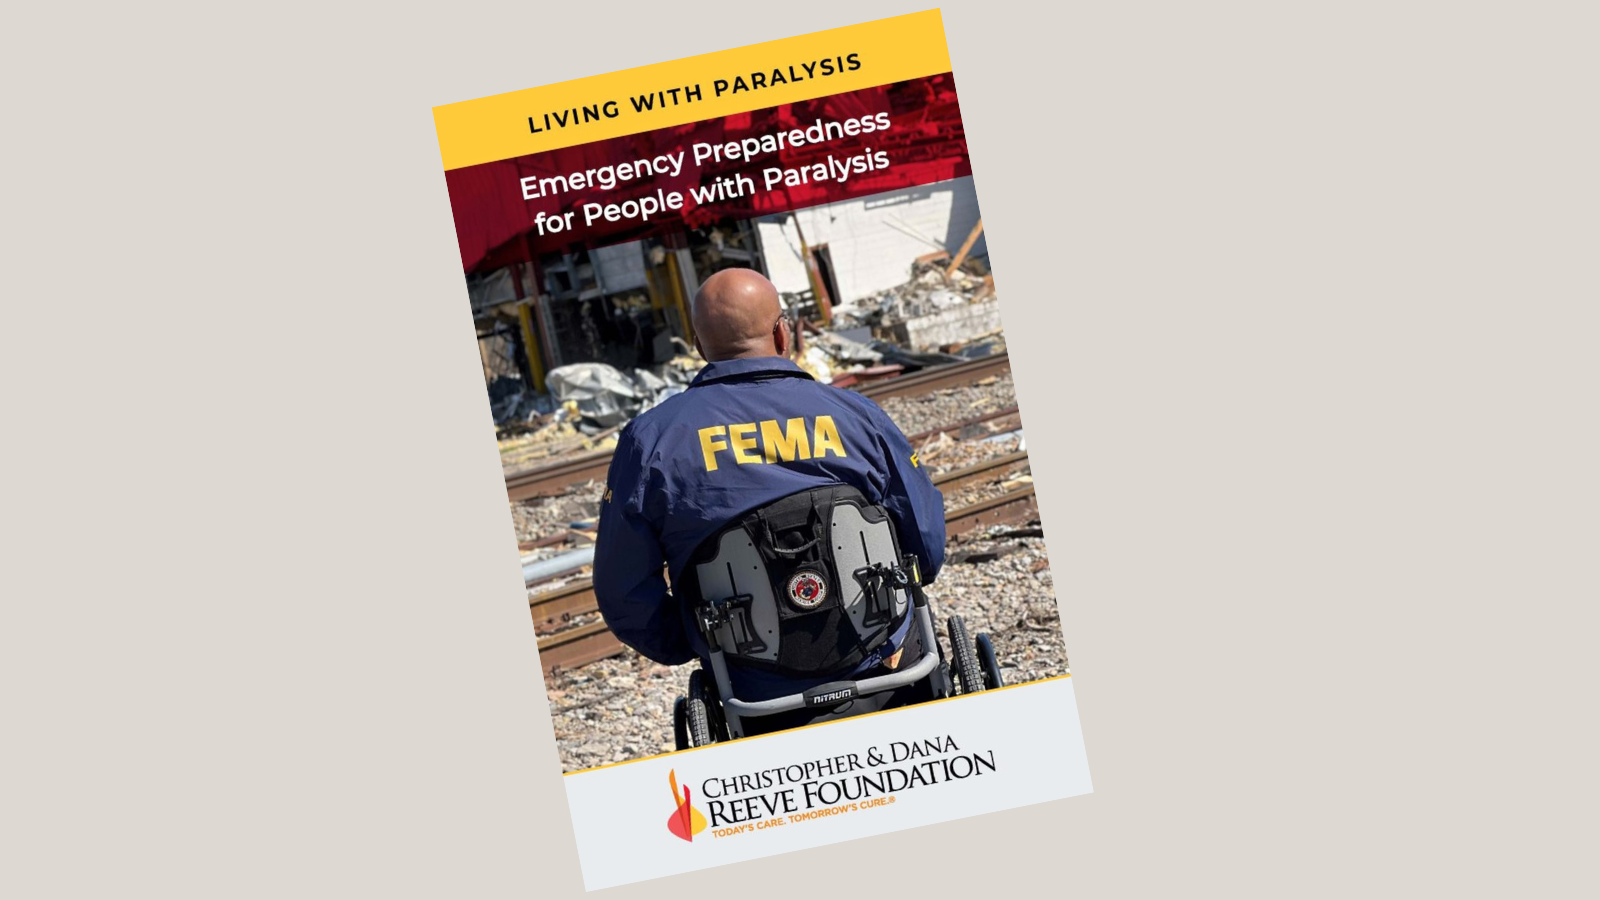 Emergency Preparedness for People with Paralysis Booklet